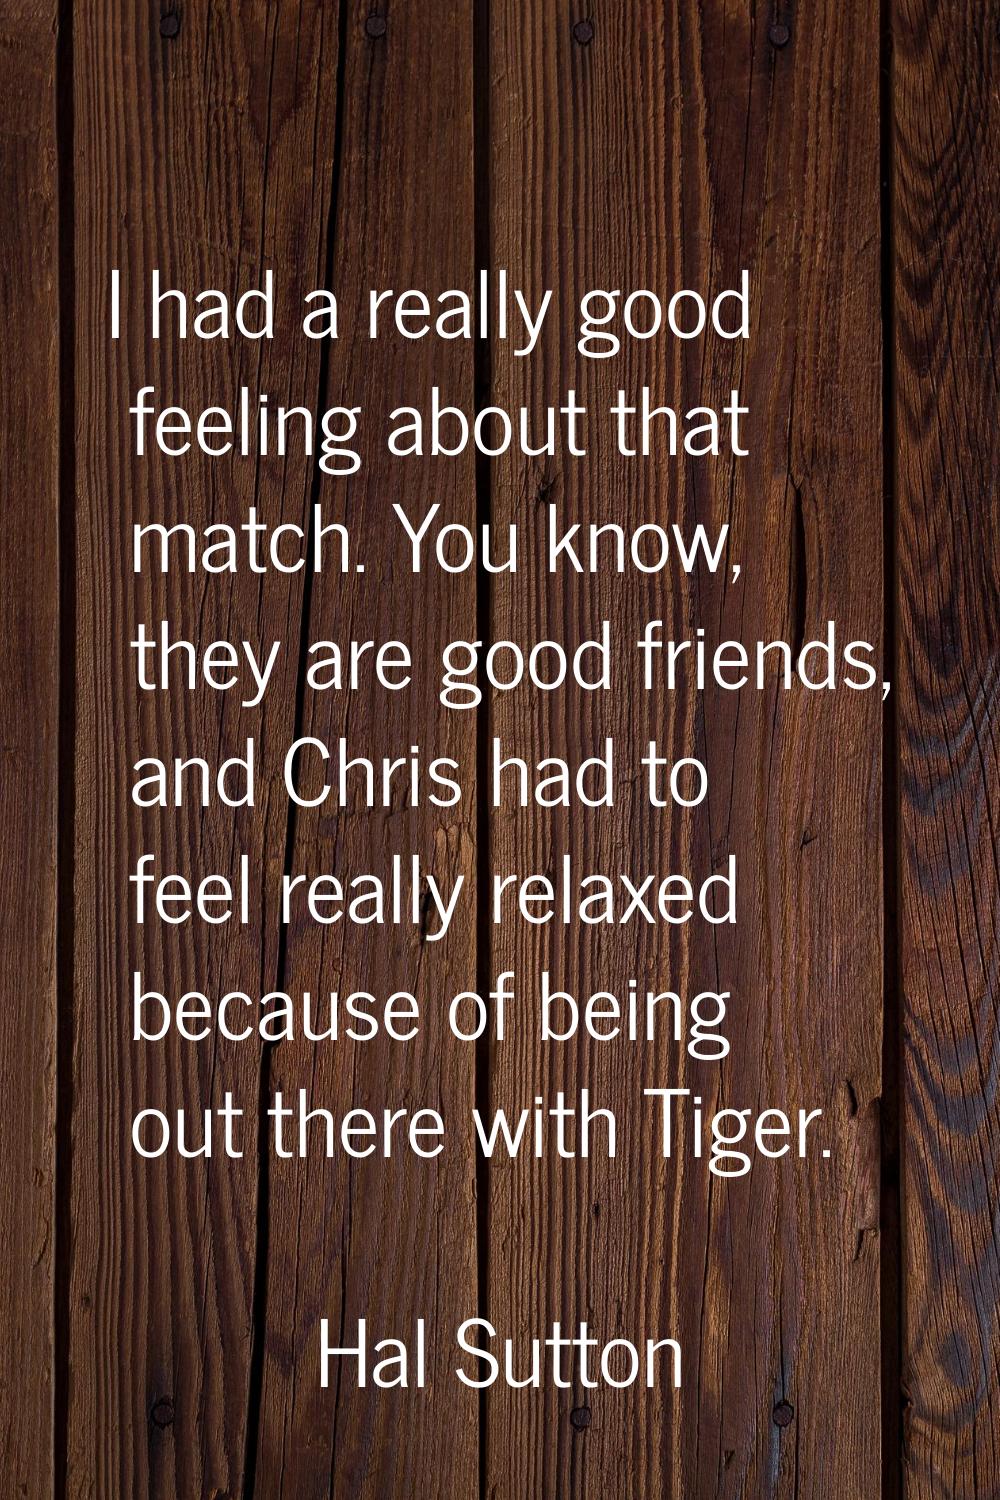 I had a really good feeling about that match. You know, they are good friends, and Chris had to fee